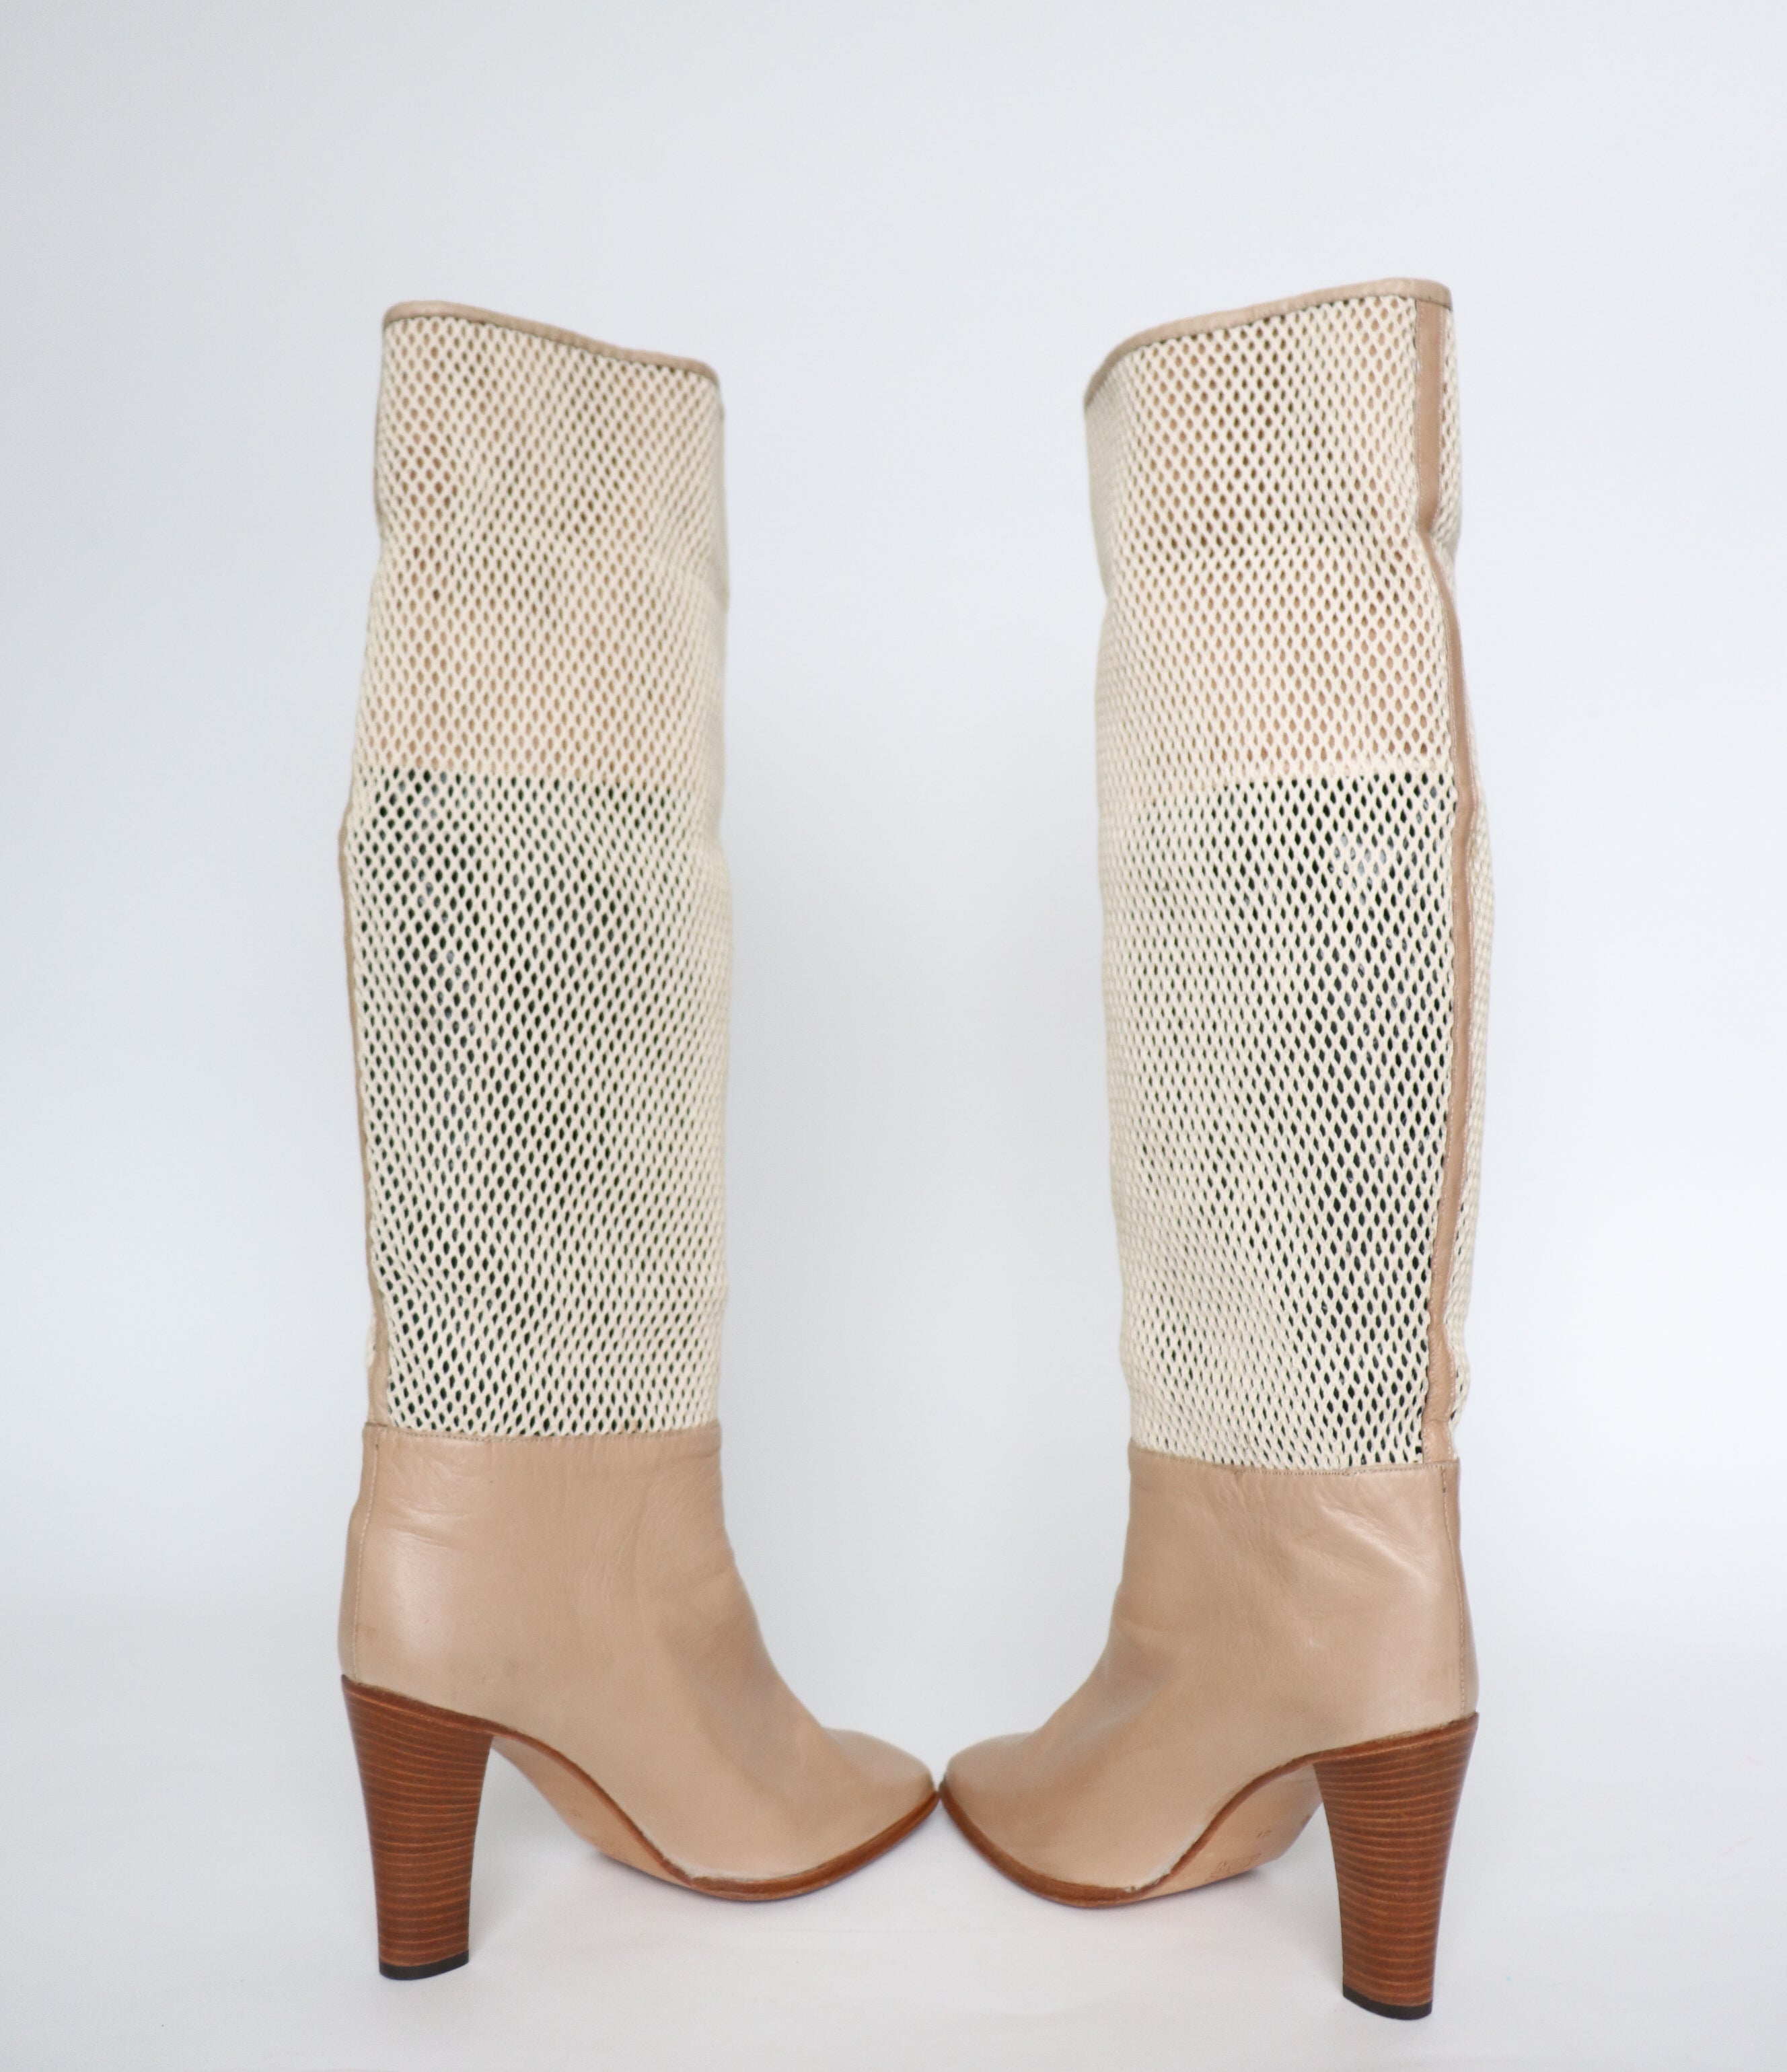 1980s Long Boots - Cream Leather / Mesh - Valmy Moda -  Label 41 - Fit UK 7 / 40